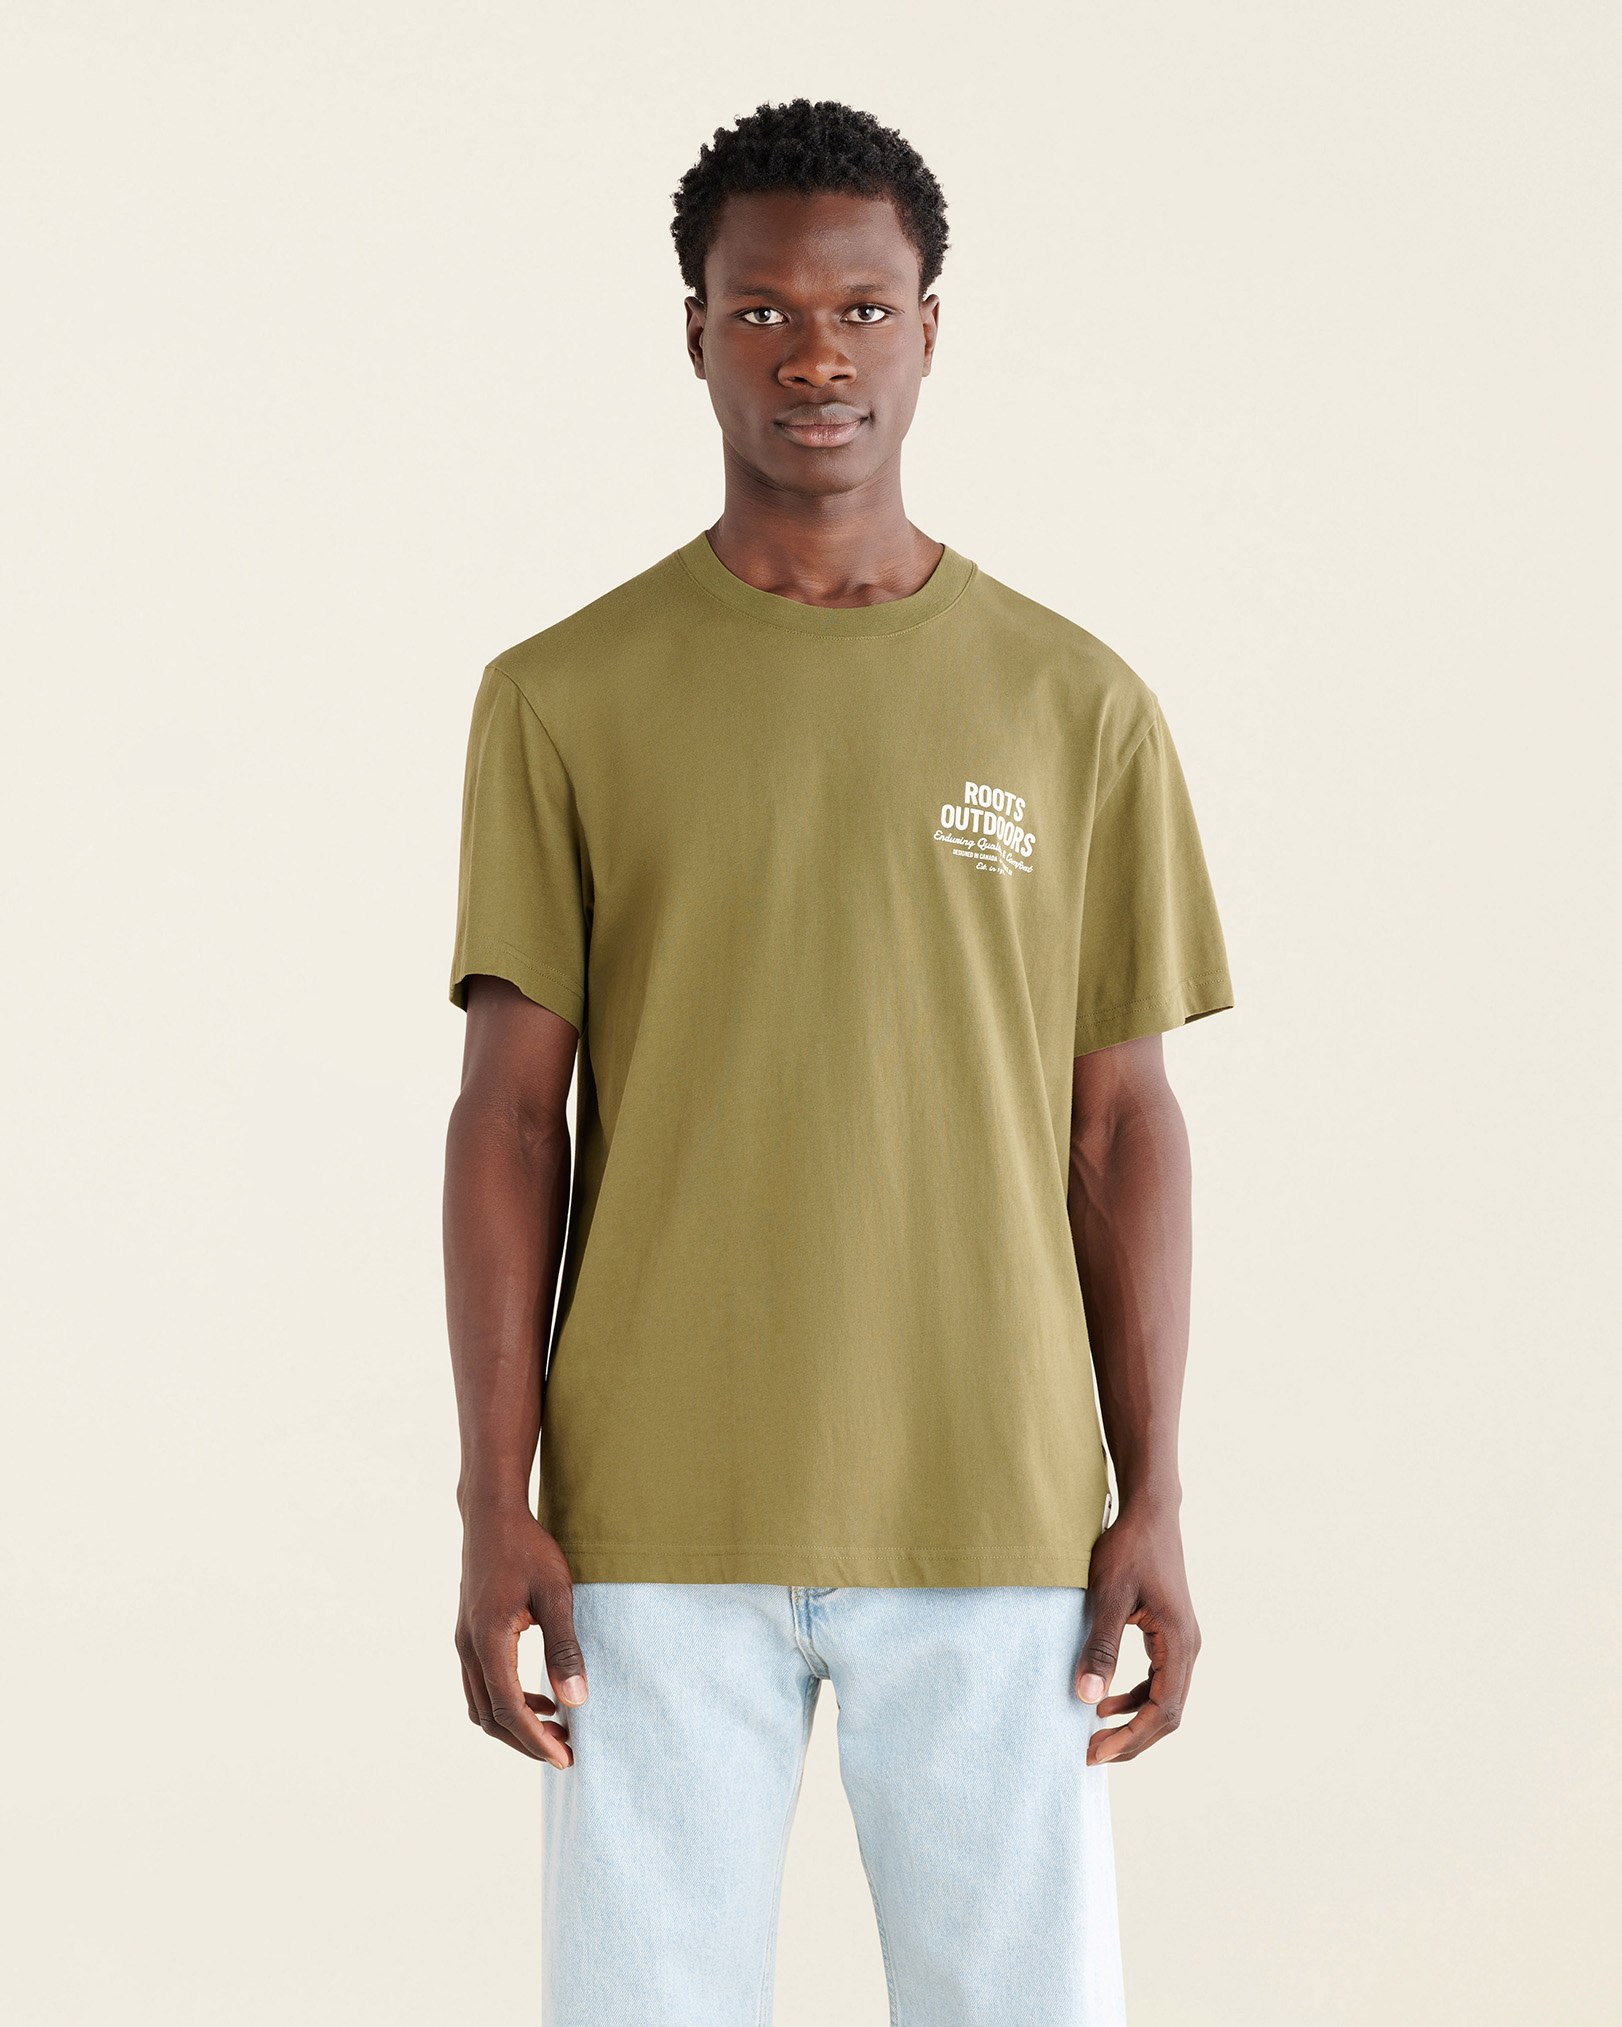 Roots Men's Enduring Quality T-Shirt in Winter Moss Green